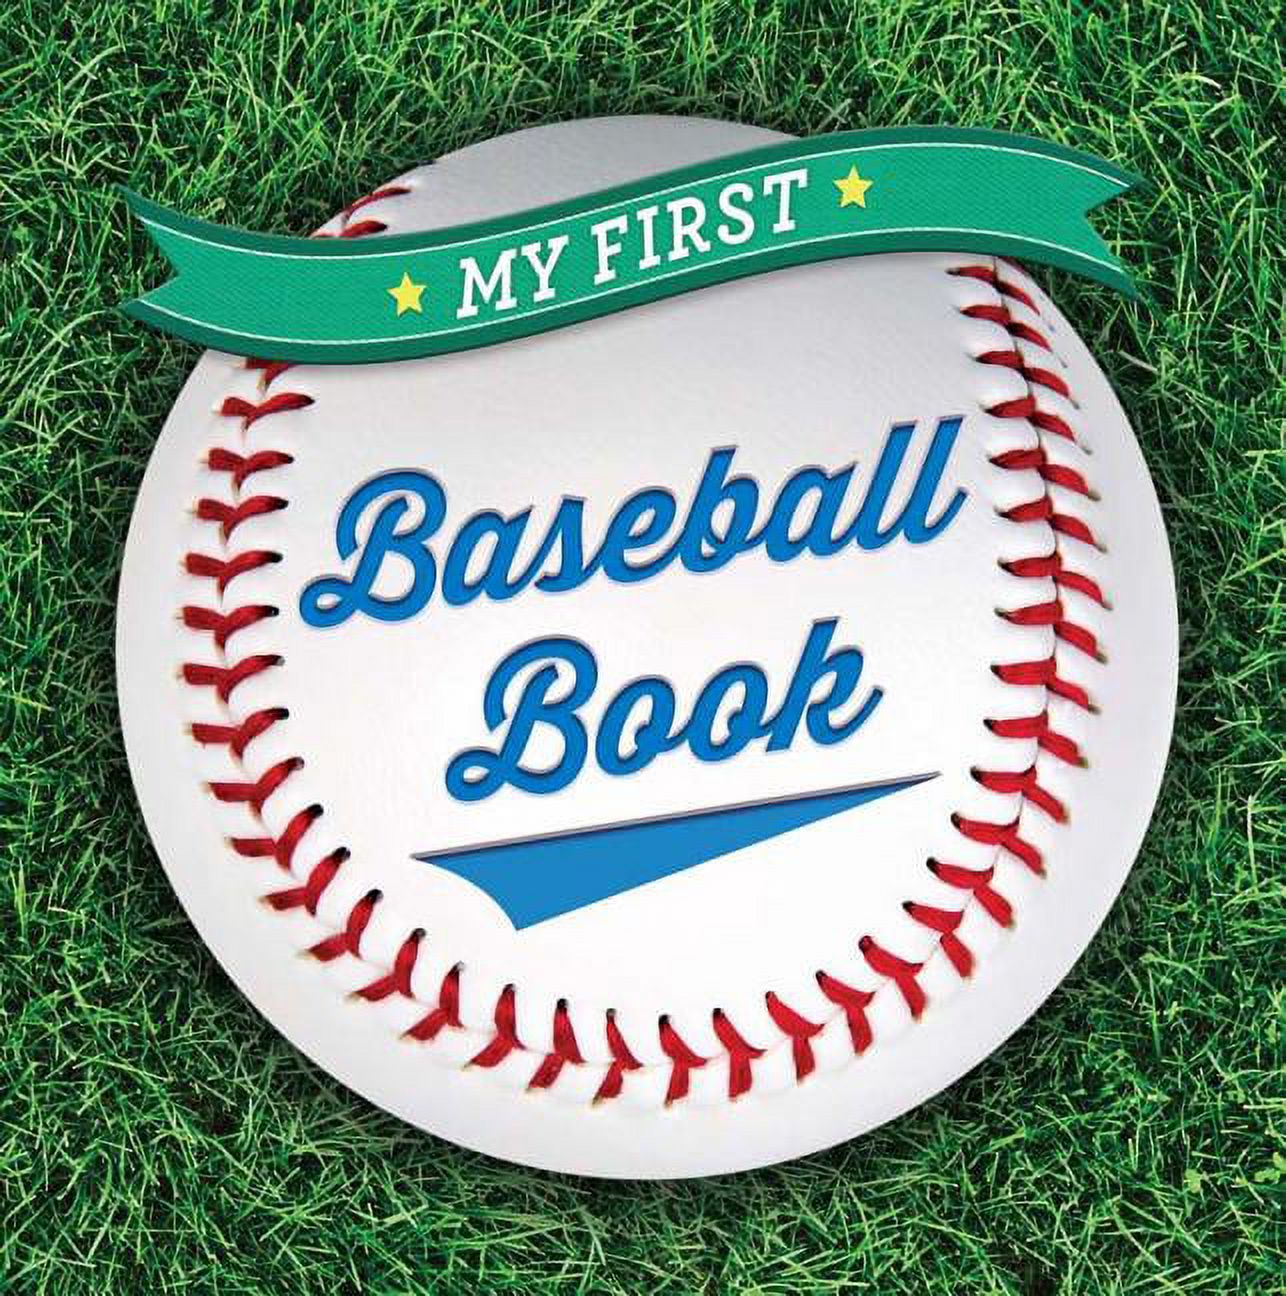 First Sports: My First Baseball Book (Board Book) - image 1 of 1